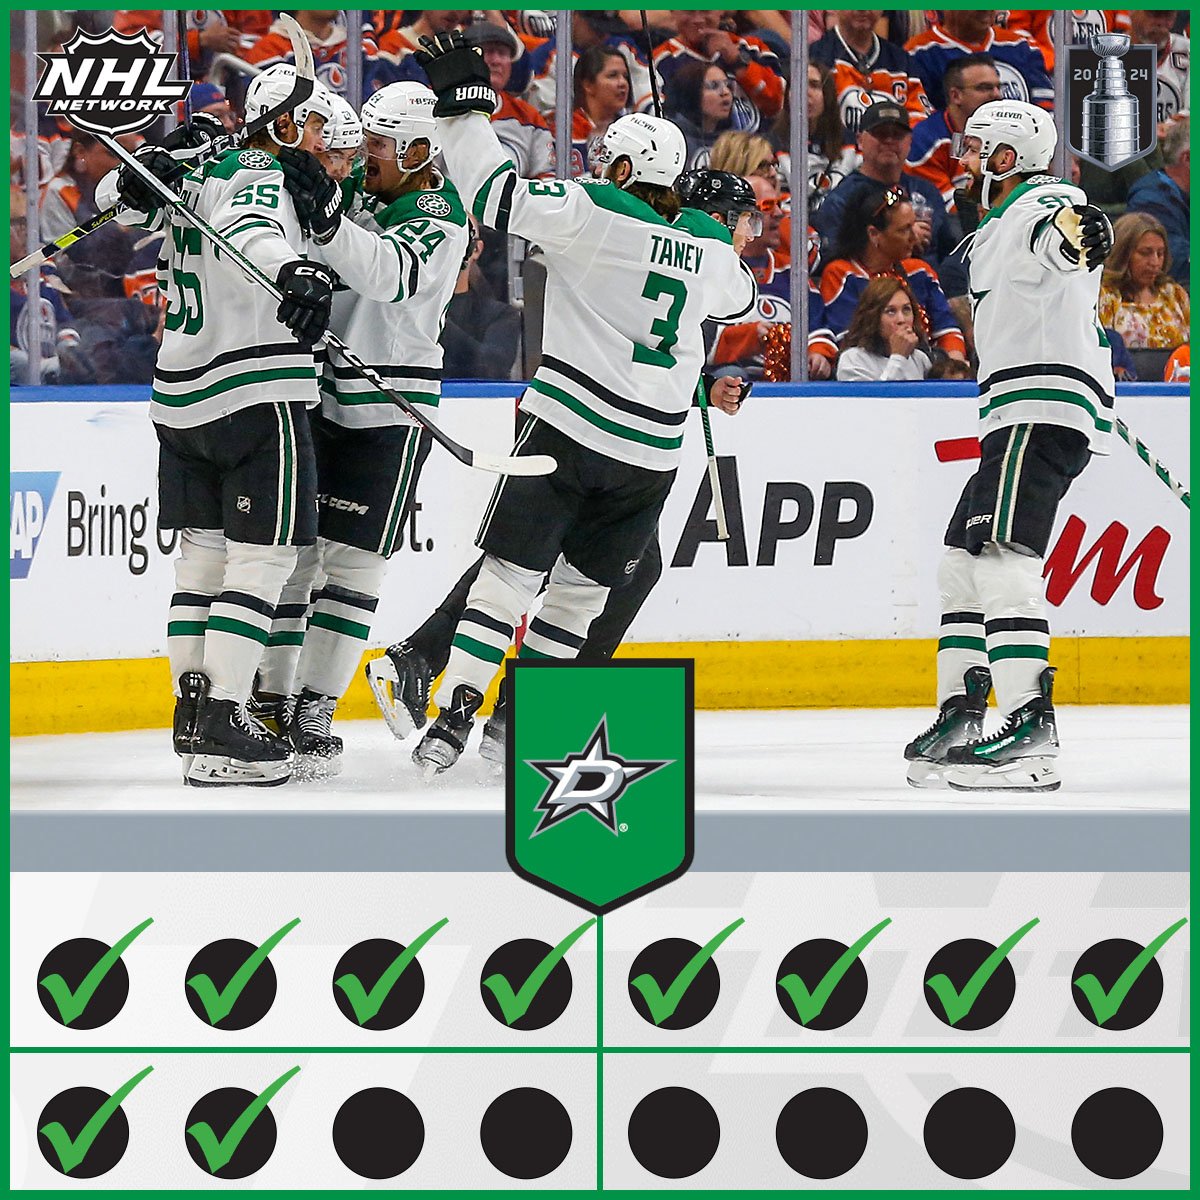 The @DallasStars continue their dominance on the road and take Game 3! #TexasHockey | #StanleyCup